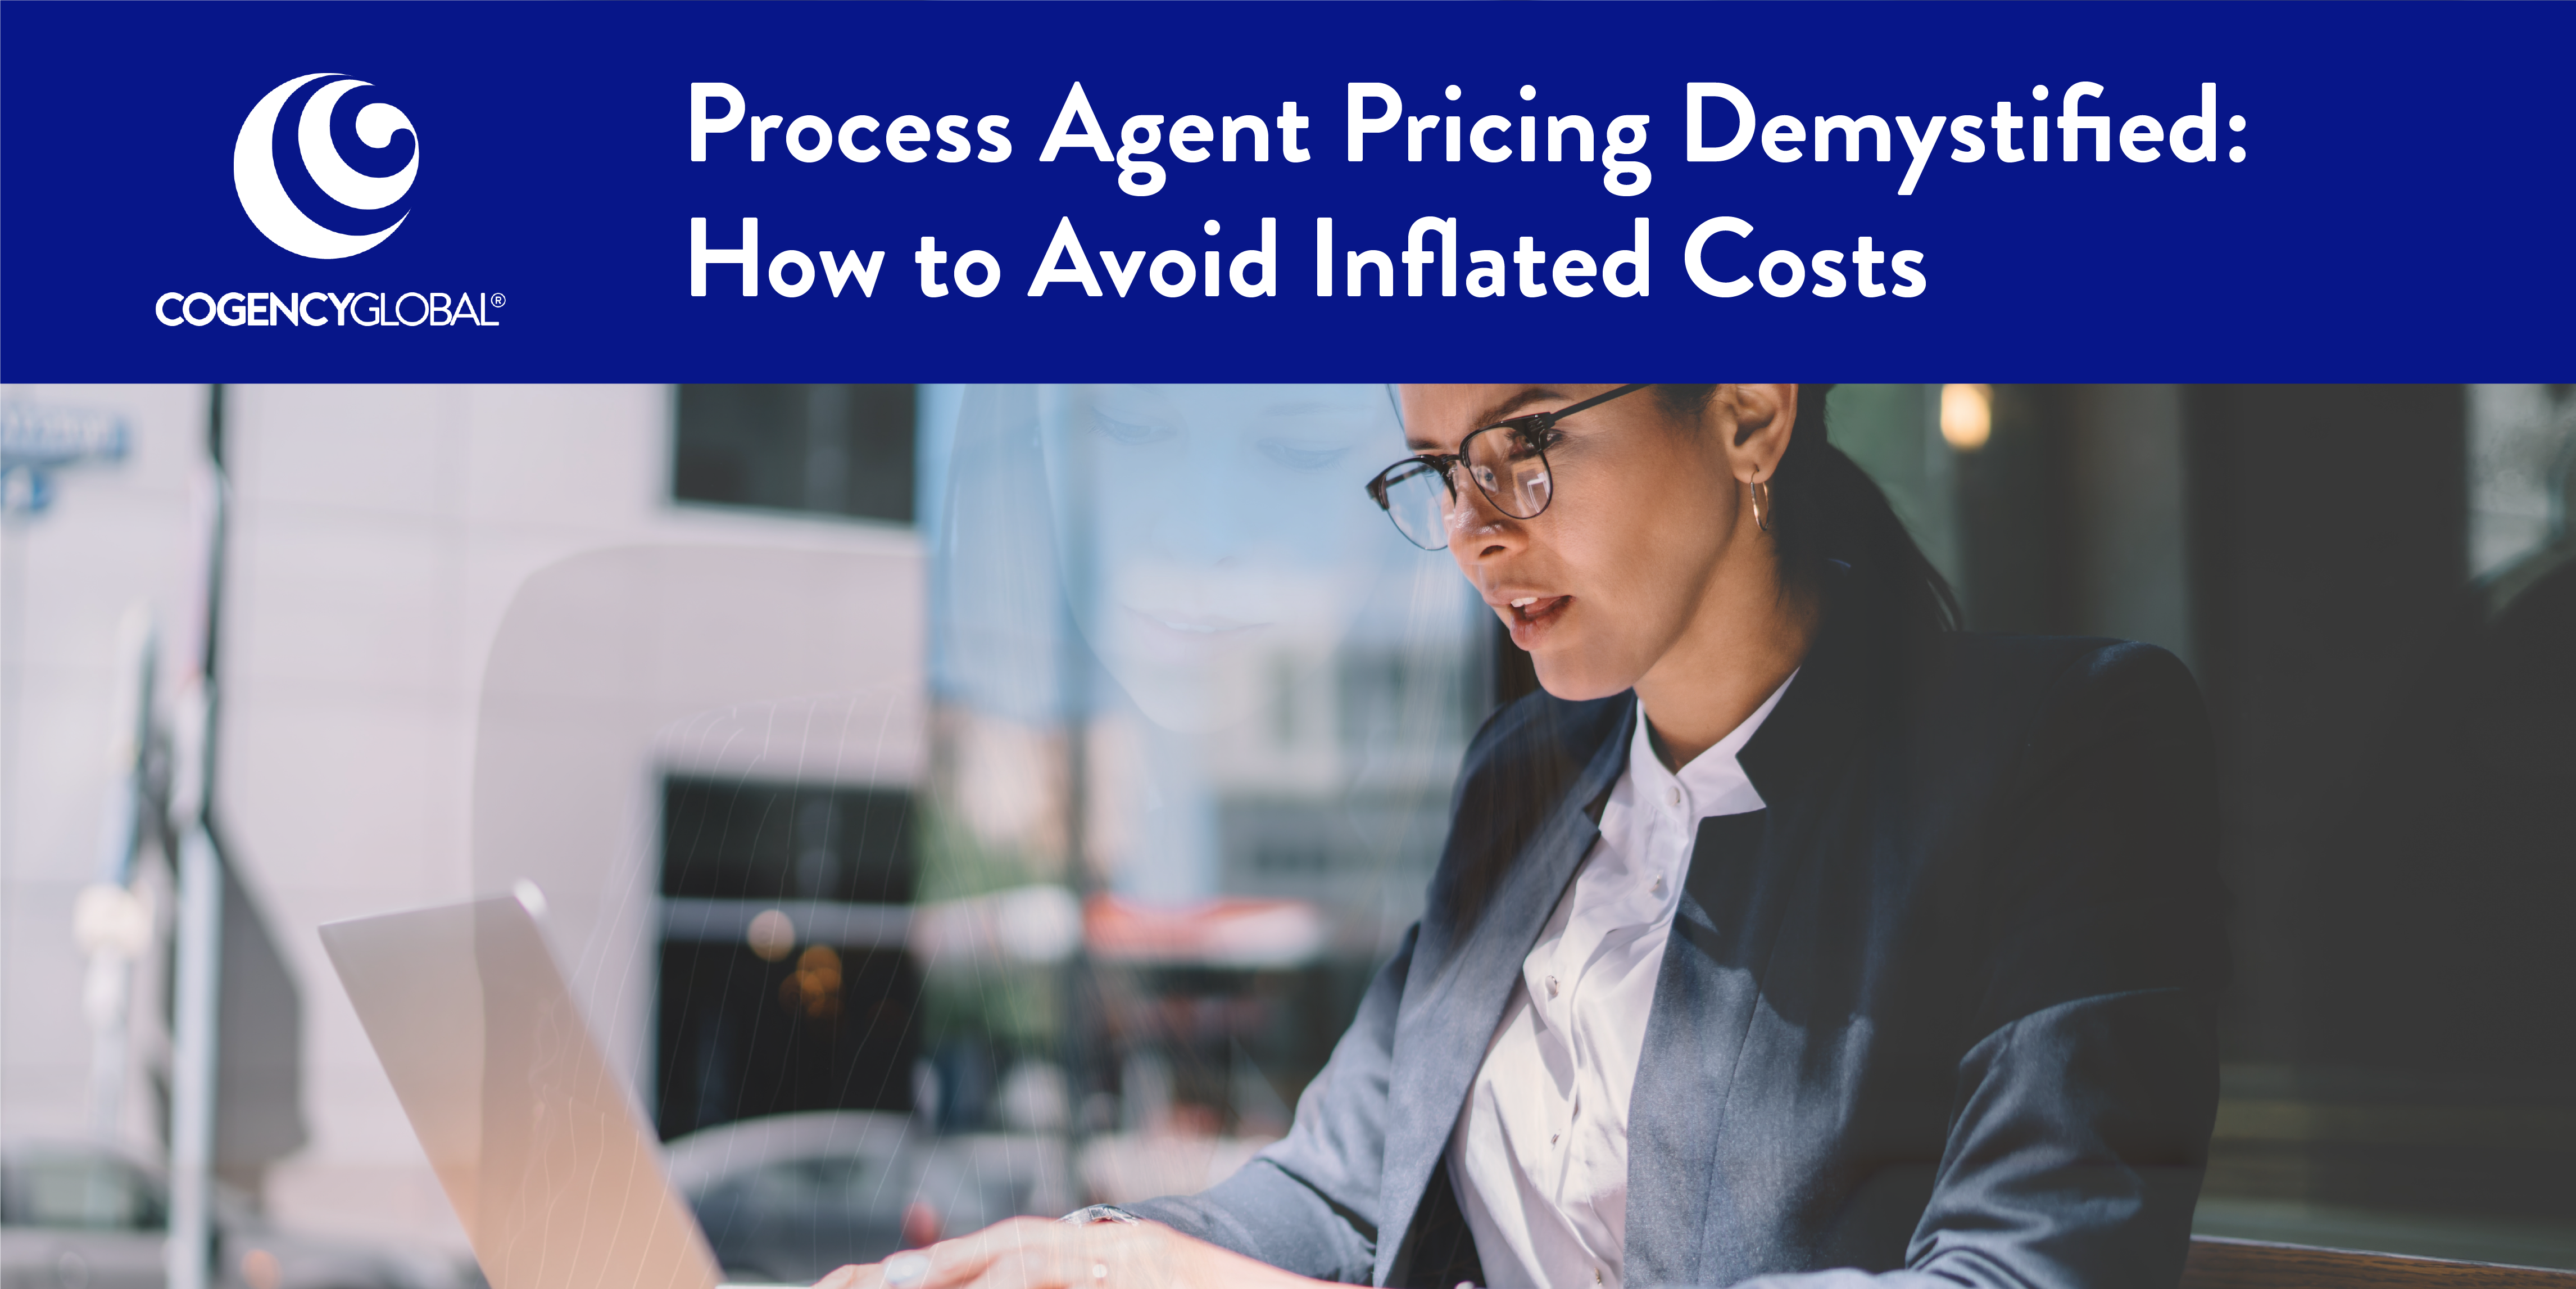 Process Agent Pricing Demystified: How to Avoid Inflated Costs